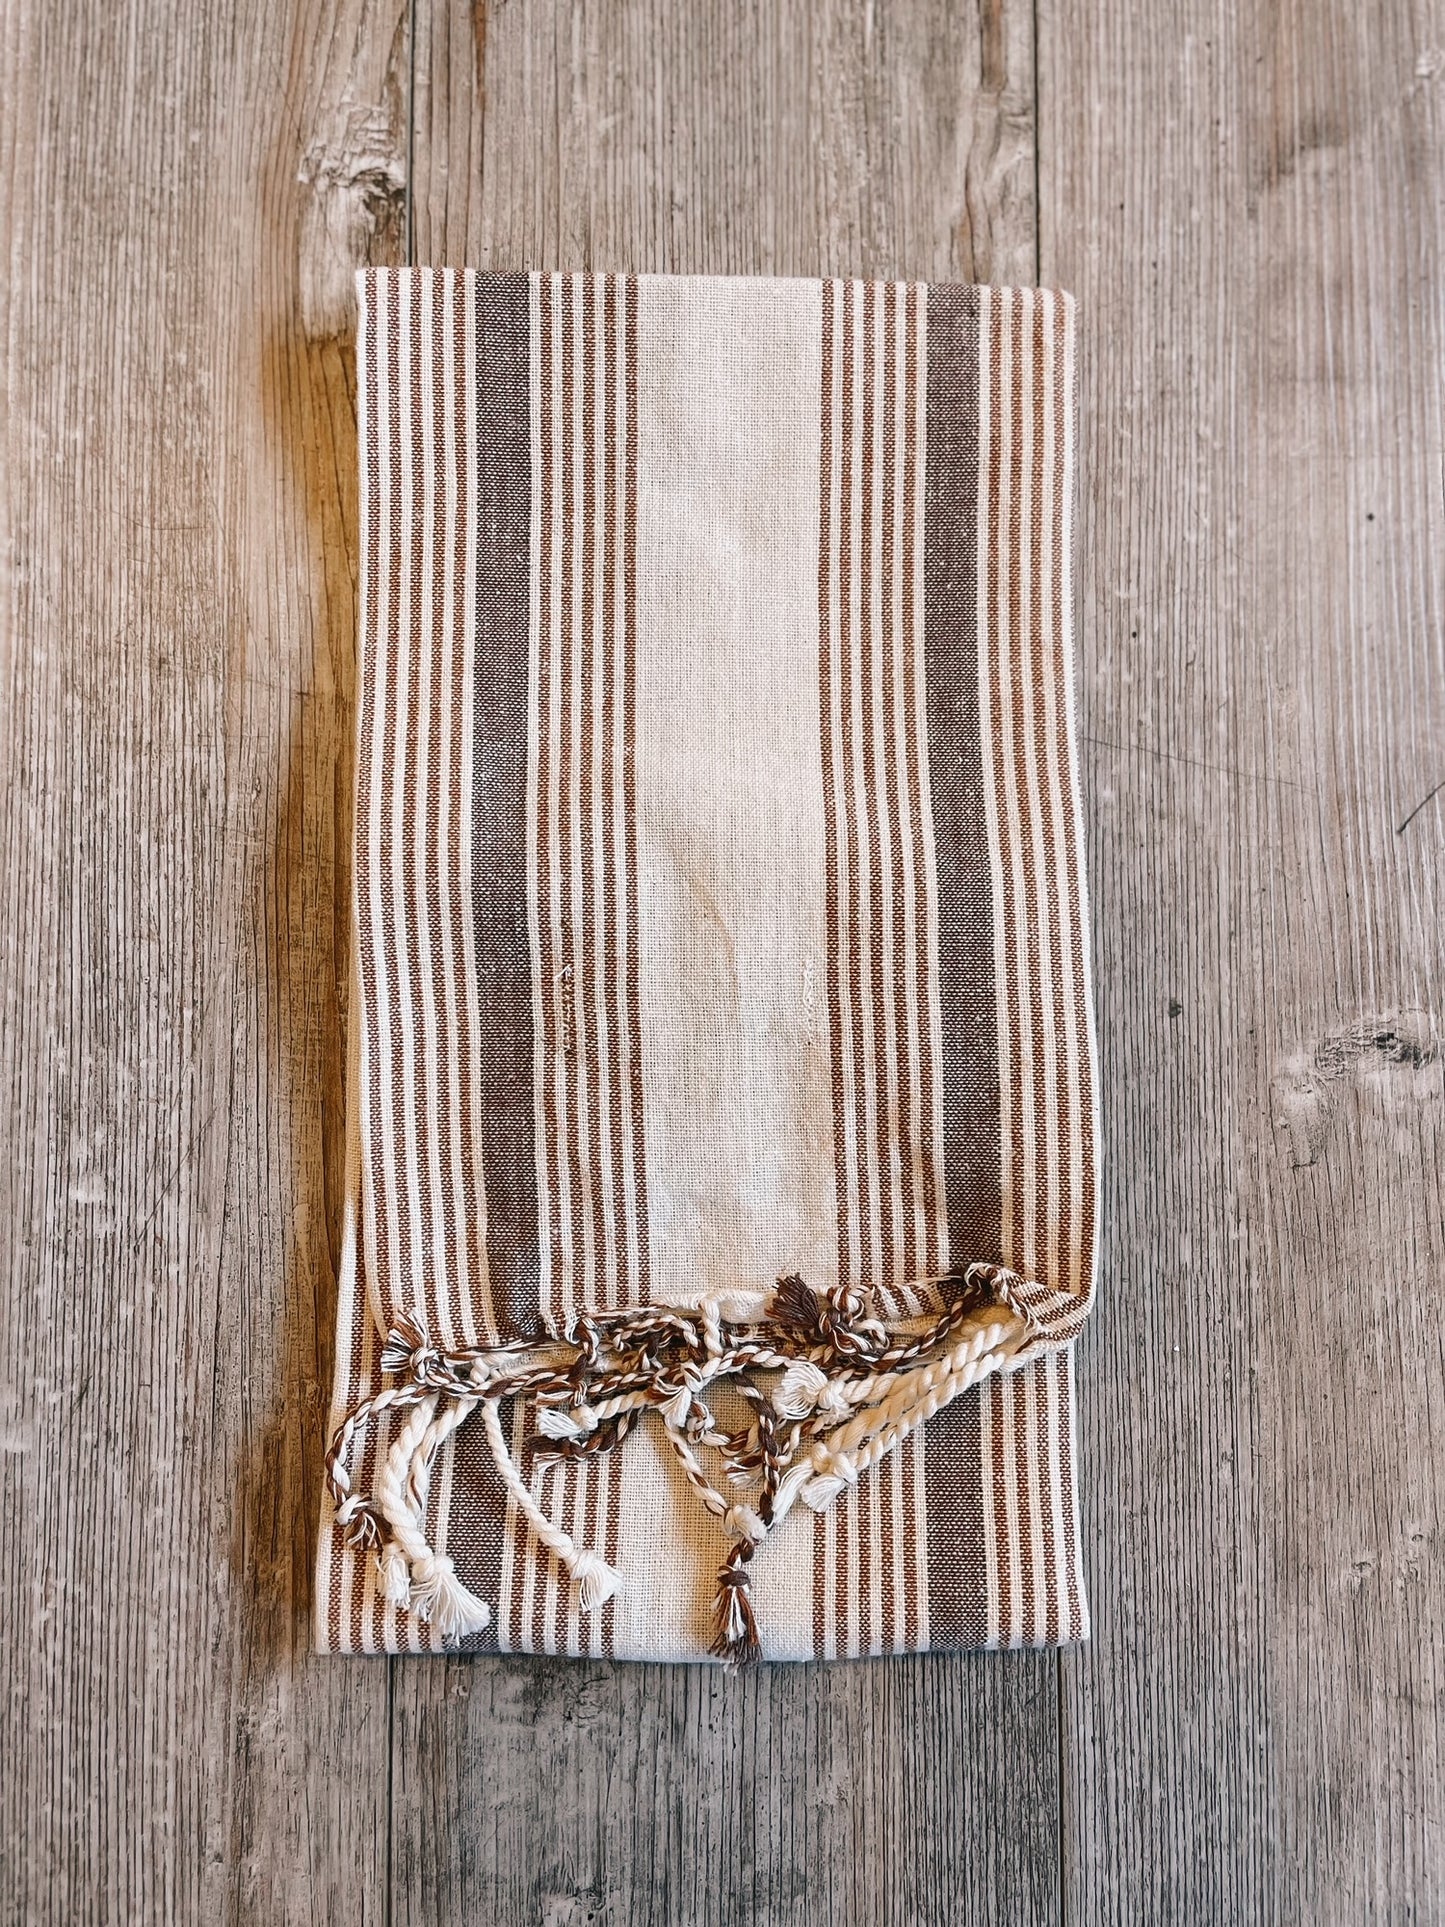 Bloomingville - Woven Cotton Yarn Dyed Tea Towel with Tassels